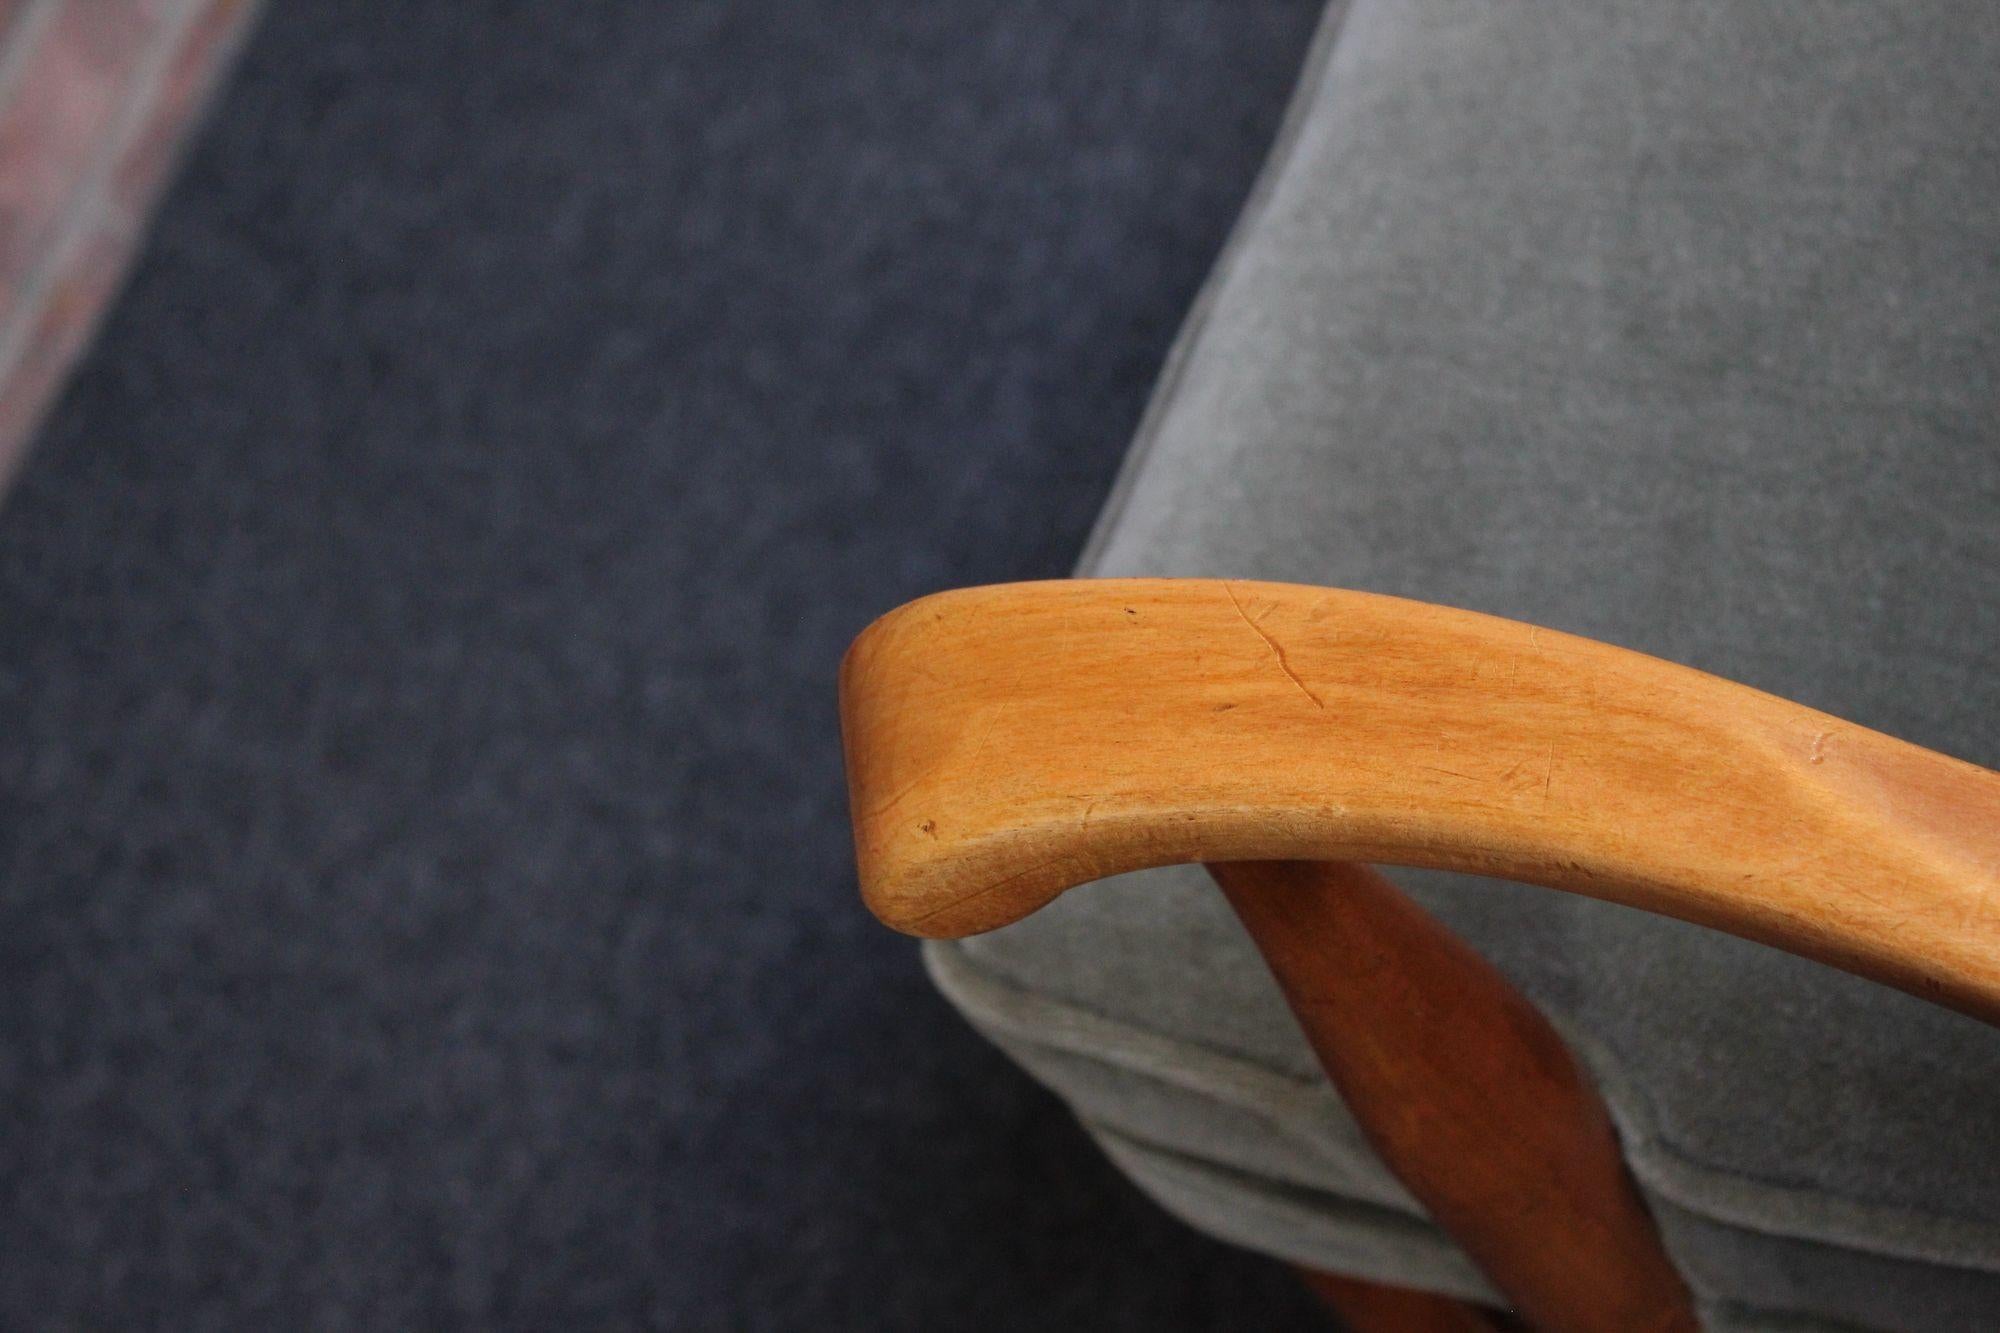 Mid-Century High-Back Birch and Mohair 